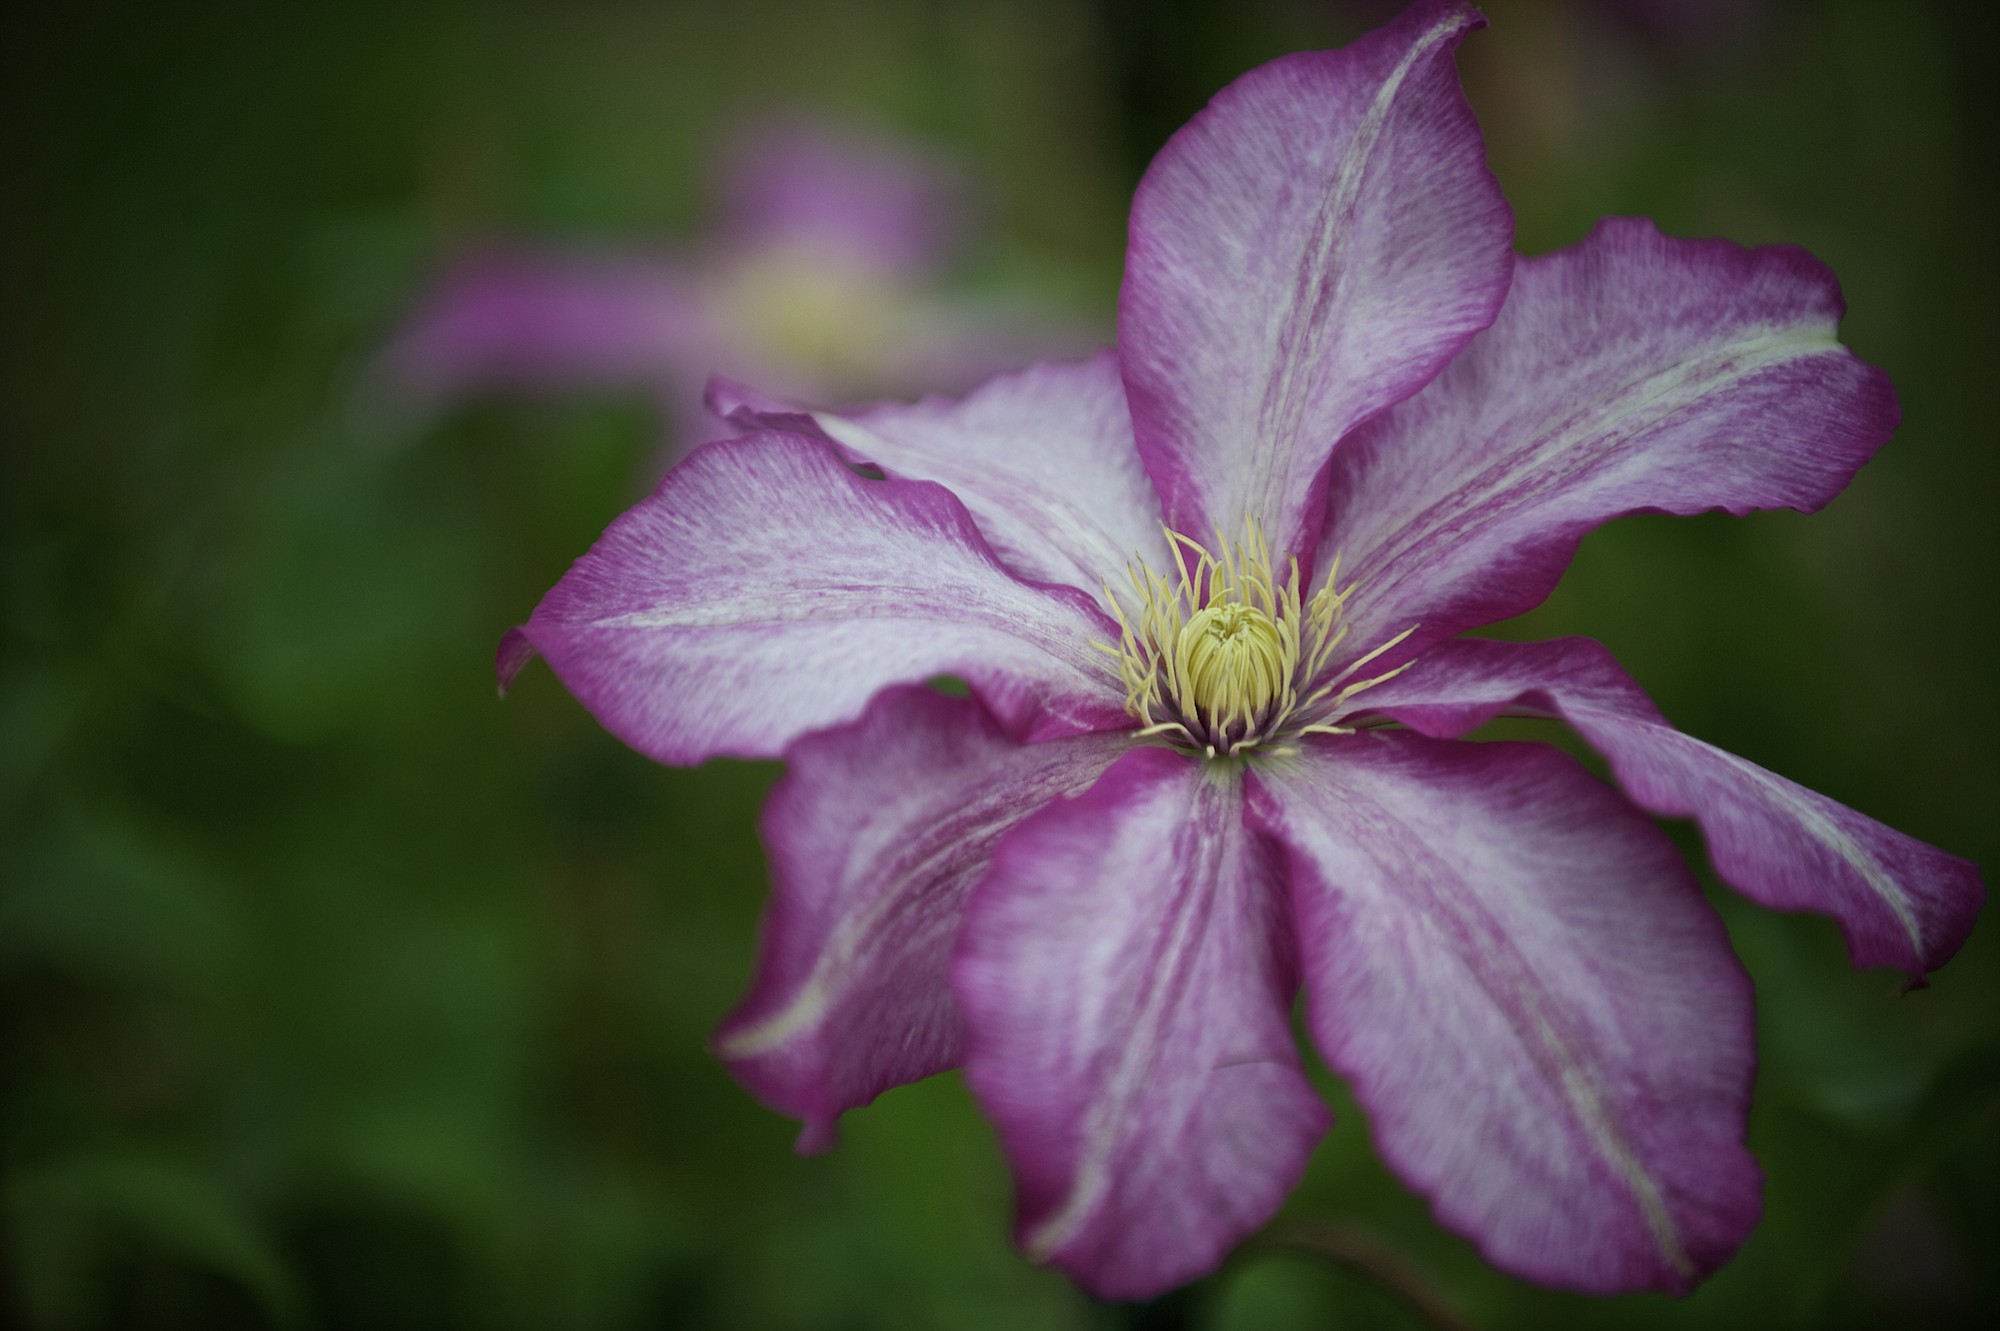 Clematis is often available at the Master Gardener Foundation of Clark County's Mother's Day Plant Sale at 78th Street Heritage Farm.